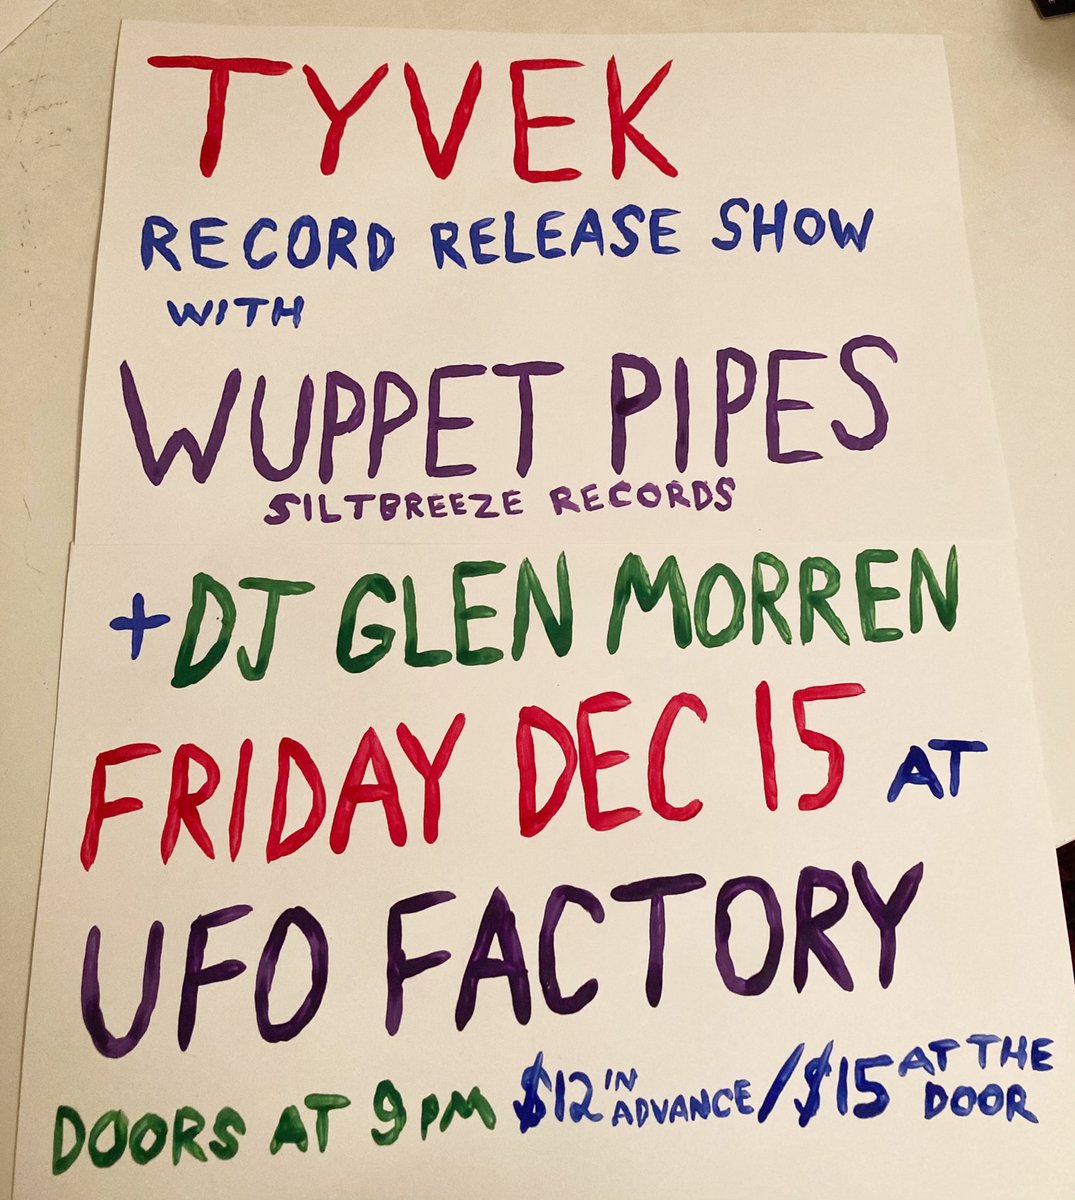 Tyvek - Overground album release party! With Wuppet Pipes!! One night only! UFO Factory, Detroit Friday December 15